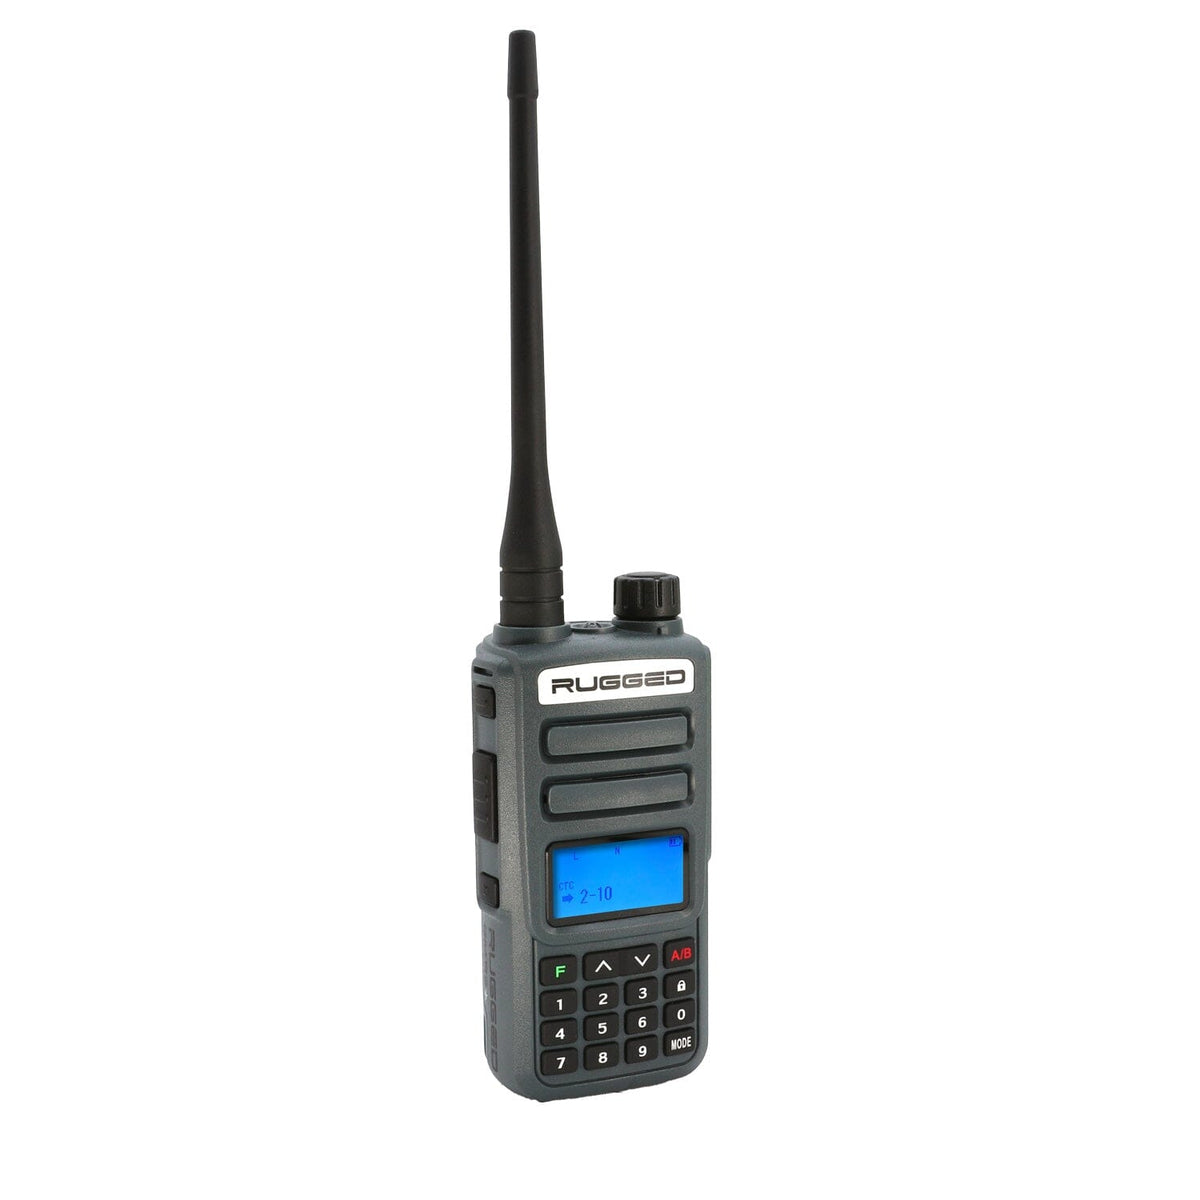 Rugged GMR2 PLUS GMRS and FRS Two Way Handheld Radio Grey – Rugged Radios